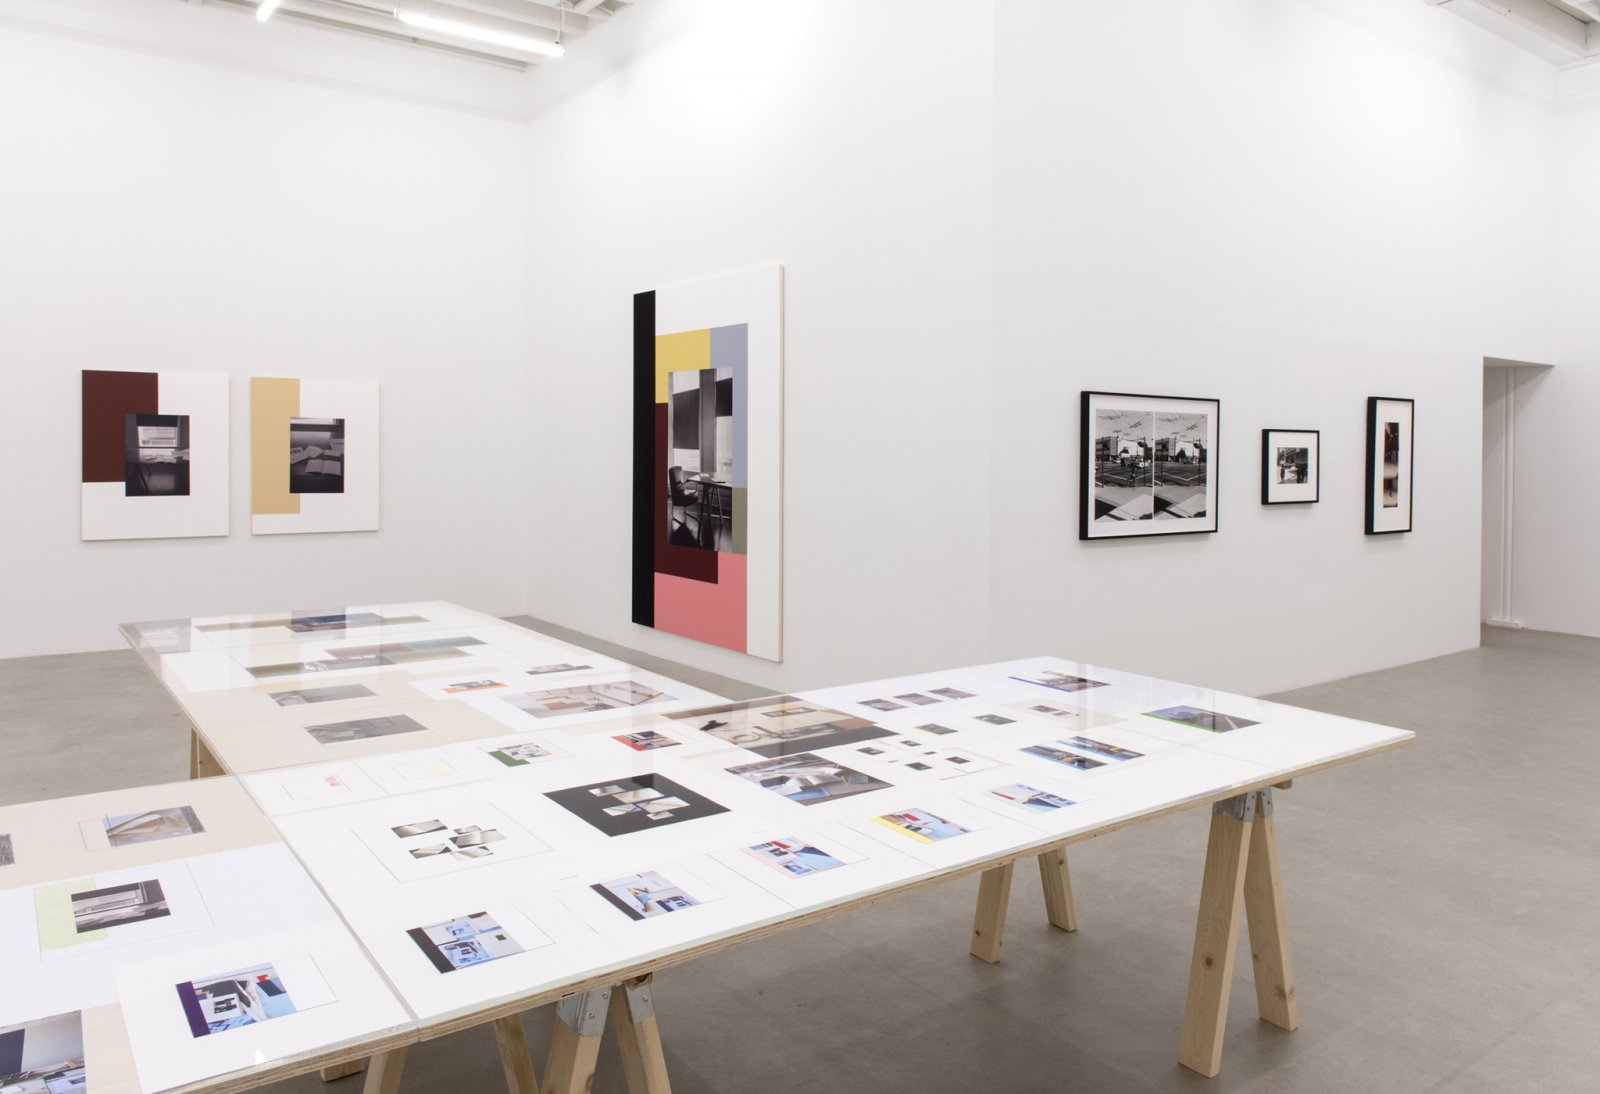 Ian Wallace, installation view, Street Floor Table Page Wall Canvas, 1969-2017, Catriona Jeffries, 2017​ by Ian Wallace